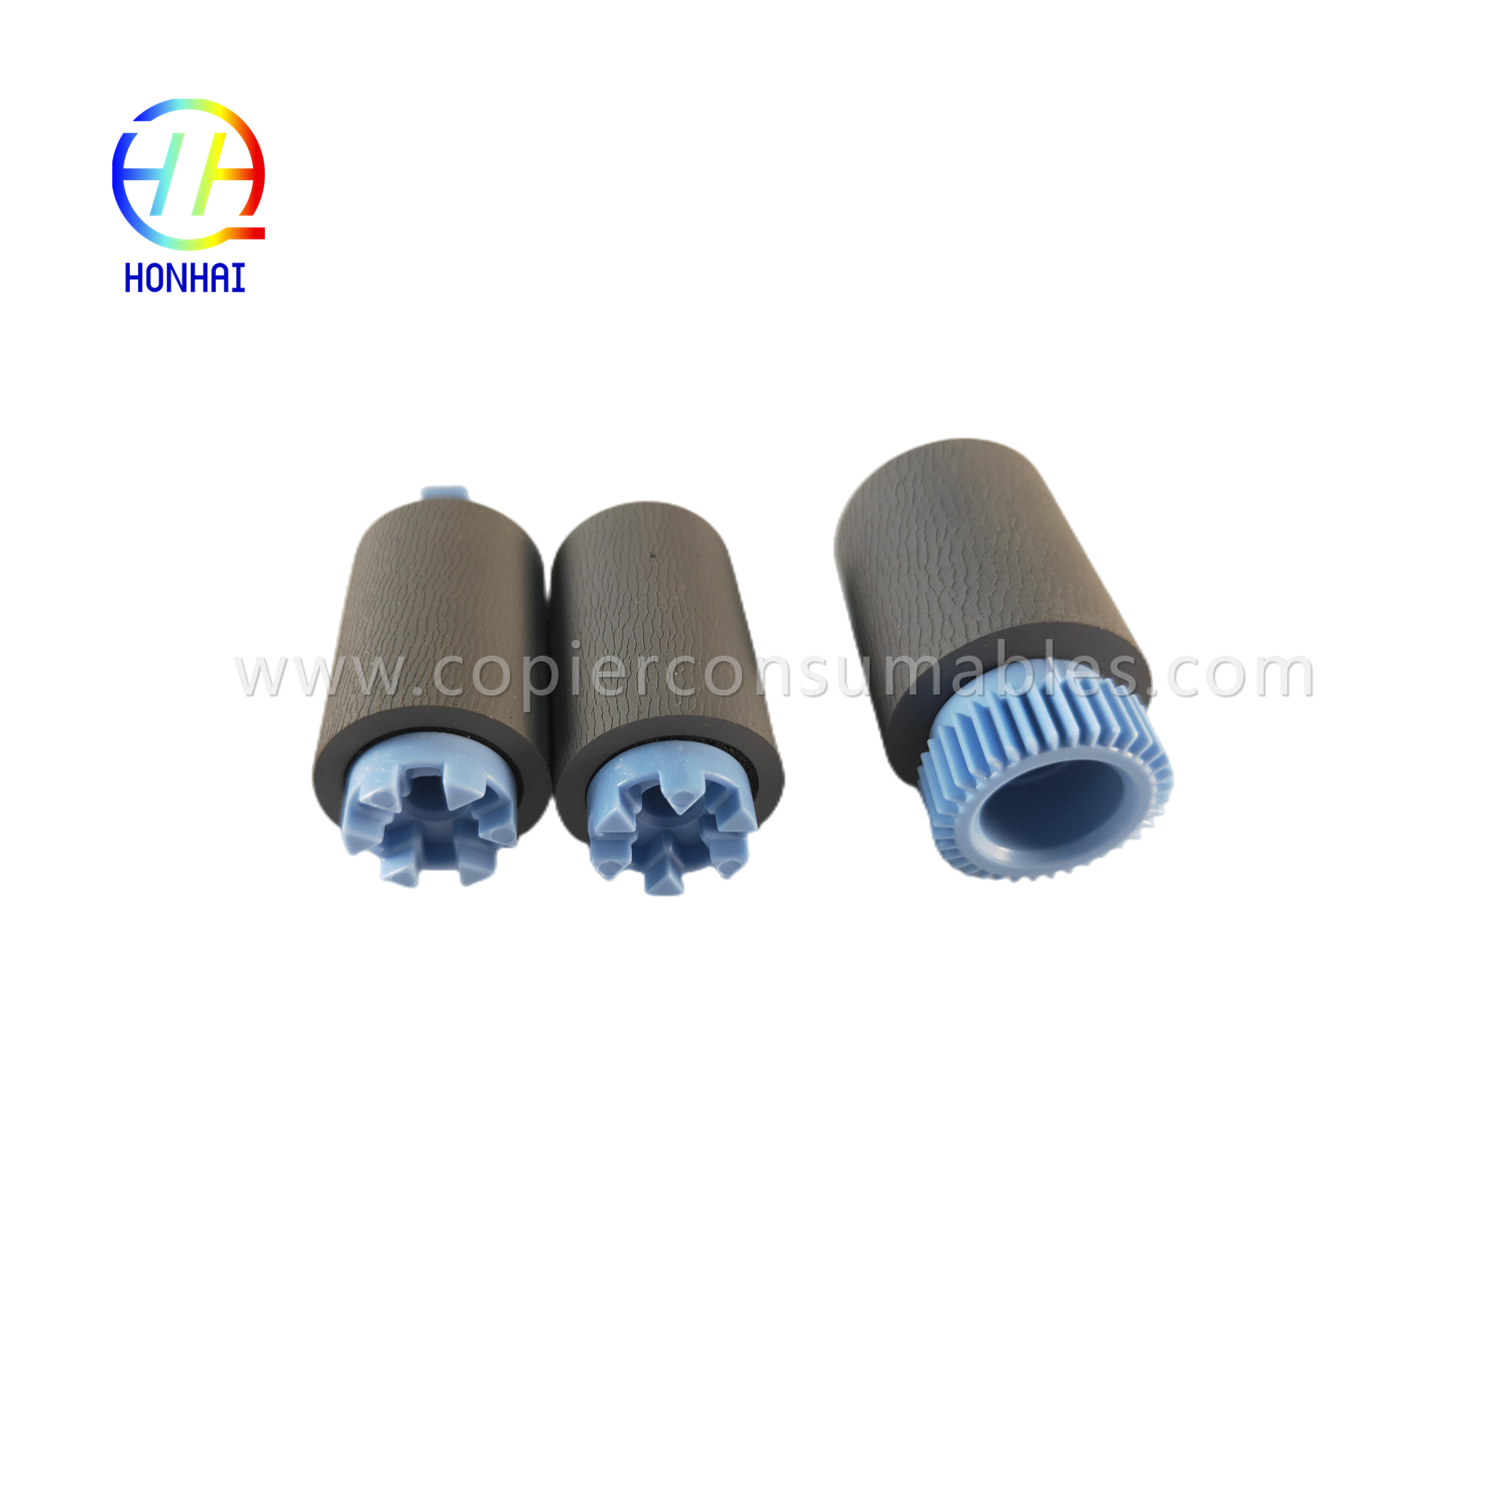 https://www.copierconsumables.com/tray-2-5-pickup-feed-separation-roller-set-for-hp-a7w93-67082-mfp-785f-780dn-e77650z-e77660z-e77650dn-e77660dn-p77740dn- p77750z-p77760z-p75050dn-p75050dw-прадукт/